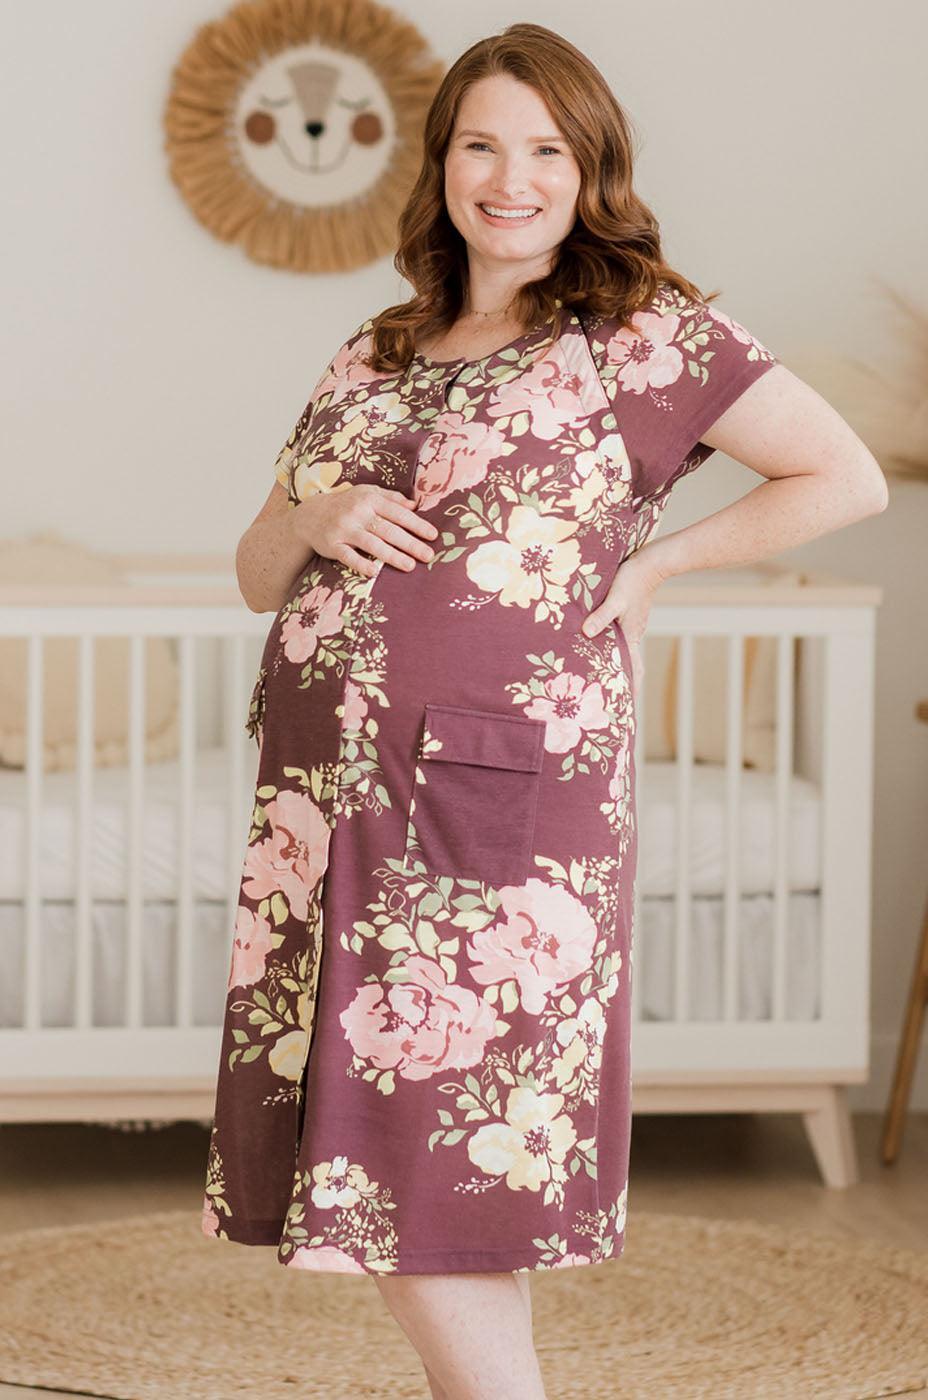 Kindred Bravely Universal Labor And Delivery Gown 3 In 1 Labor